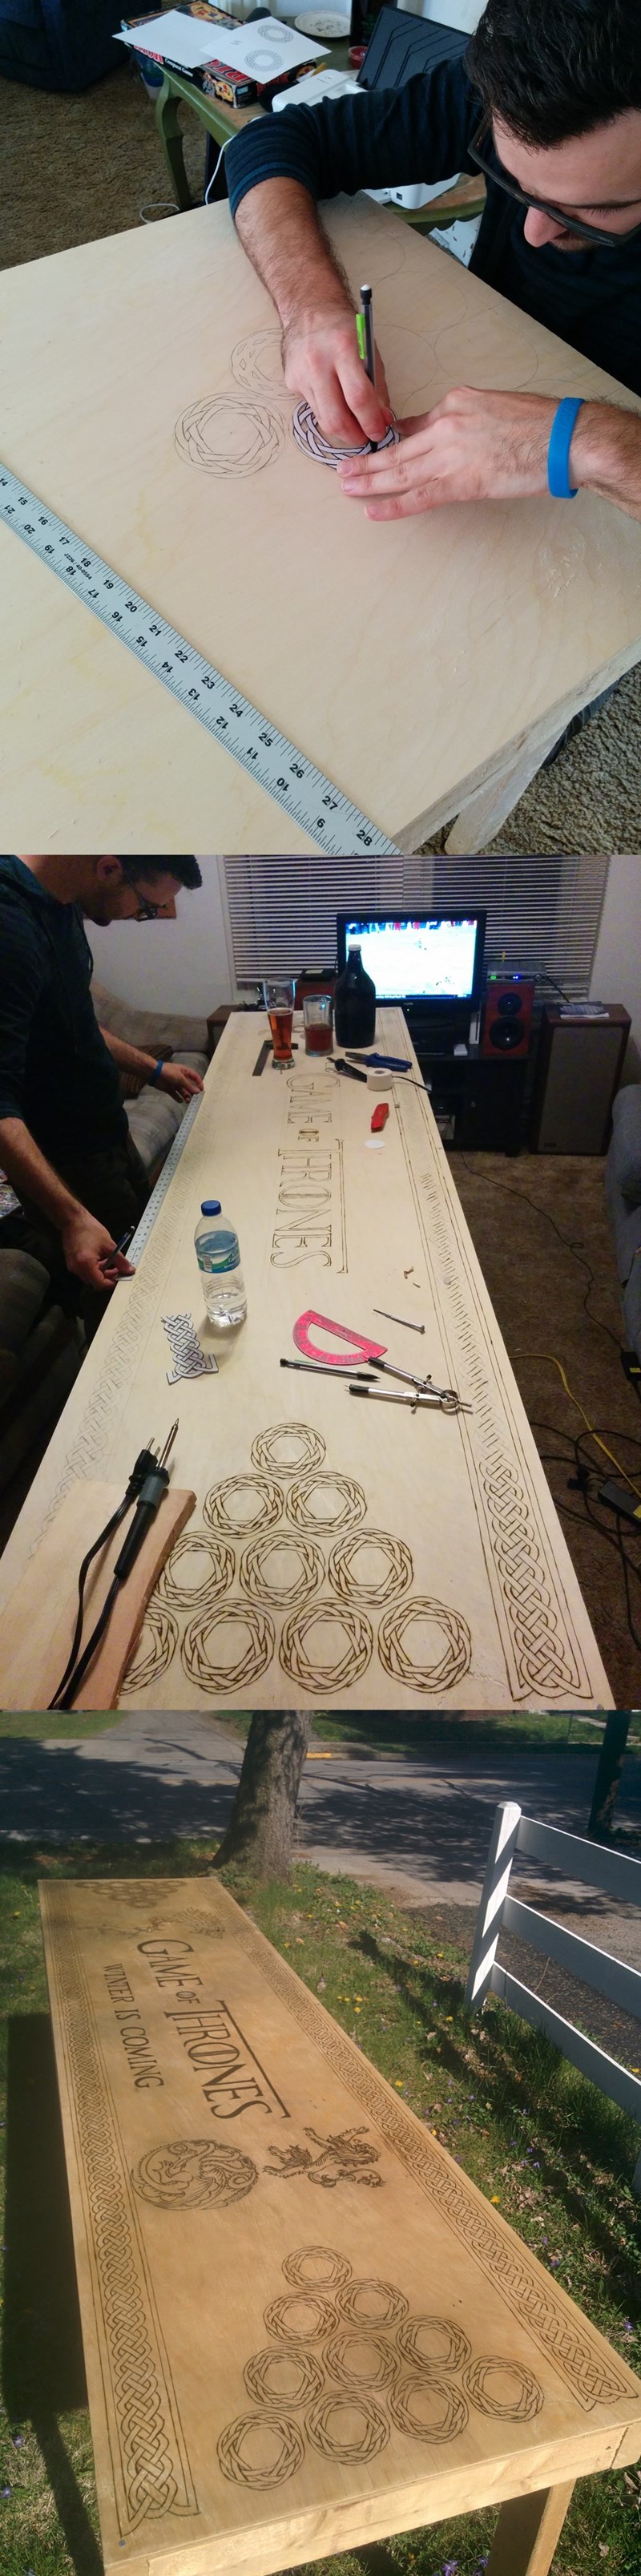 This Guy Made His Own Game of Thrones Beer Pong Table